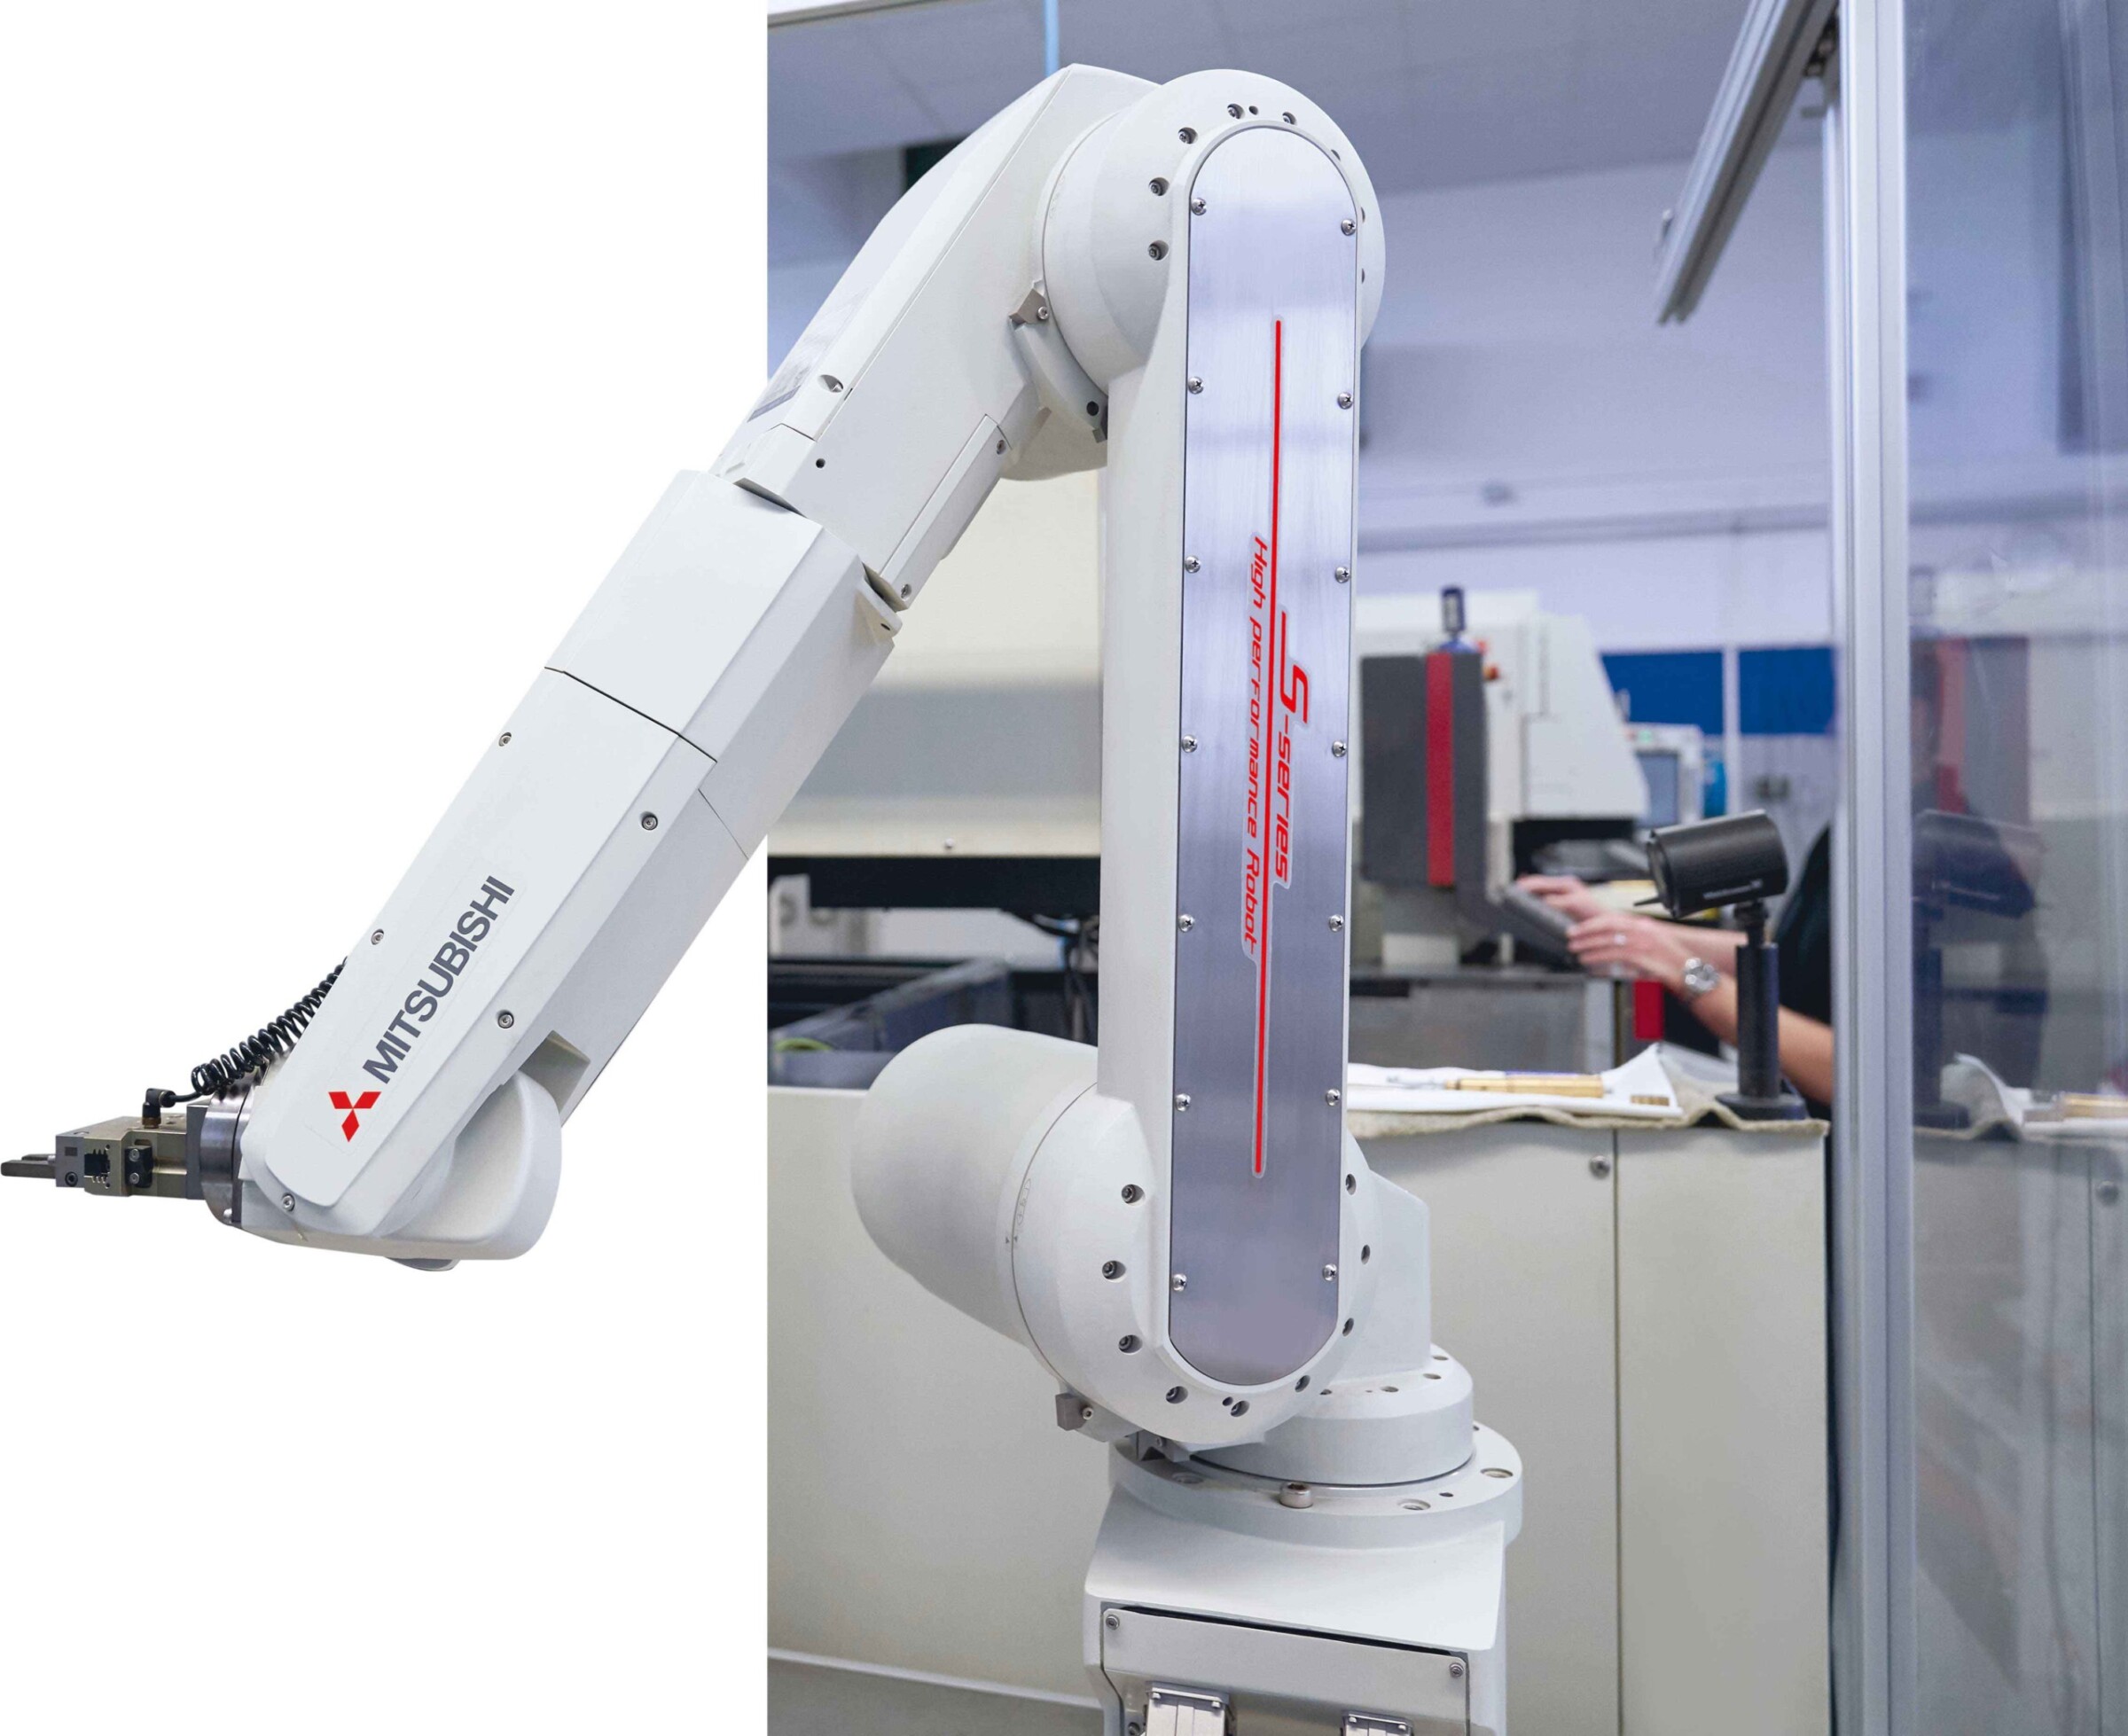 The robot arm is already firmly established on the shop floor – a clear indication of how the future of EDM could look.